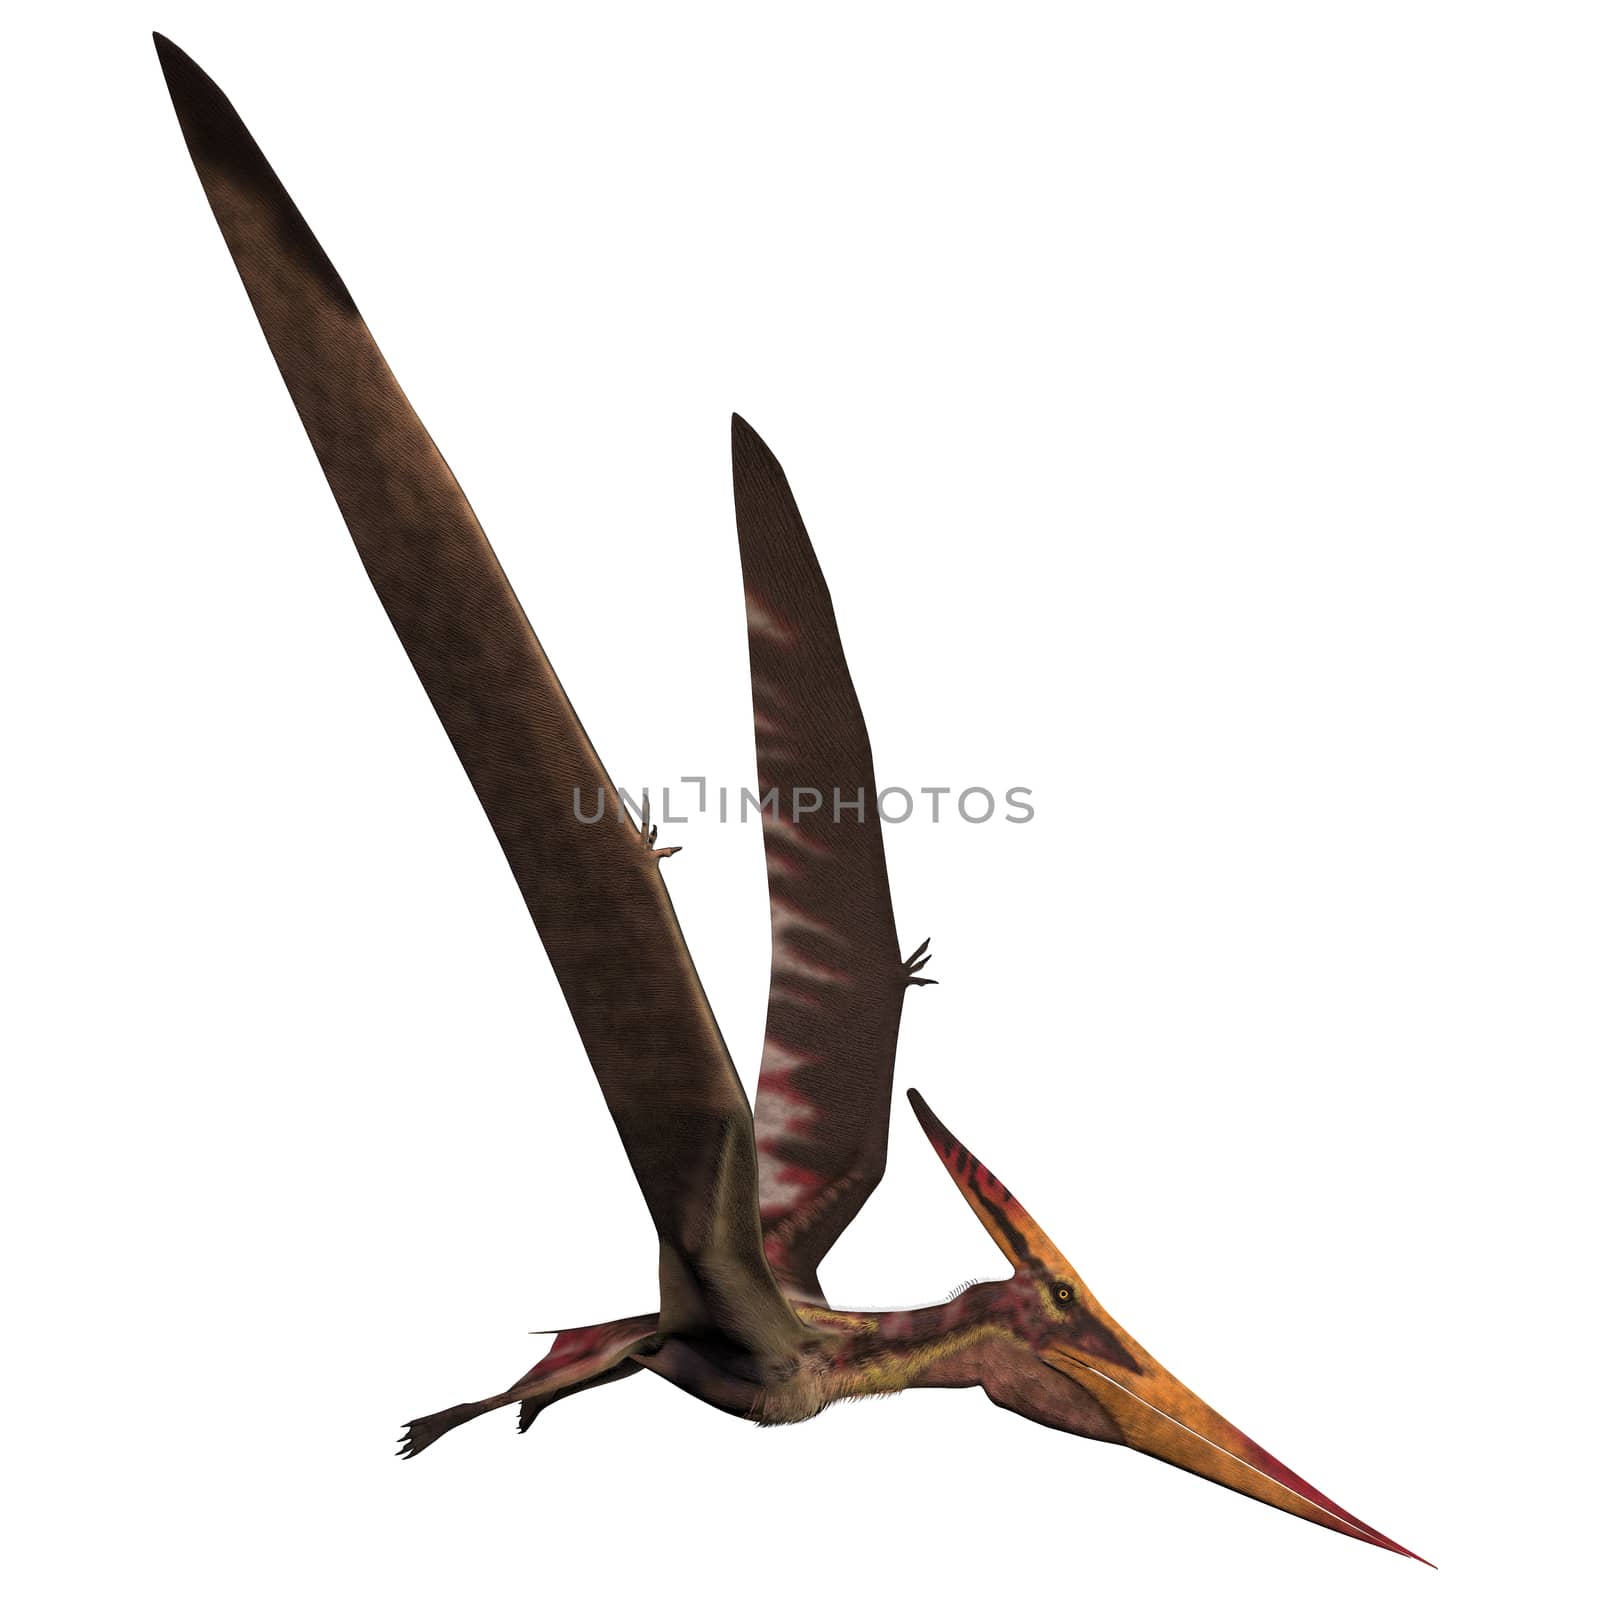 Pteranodon was a reptilian bird from the Late Cretaceous of North America.